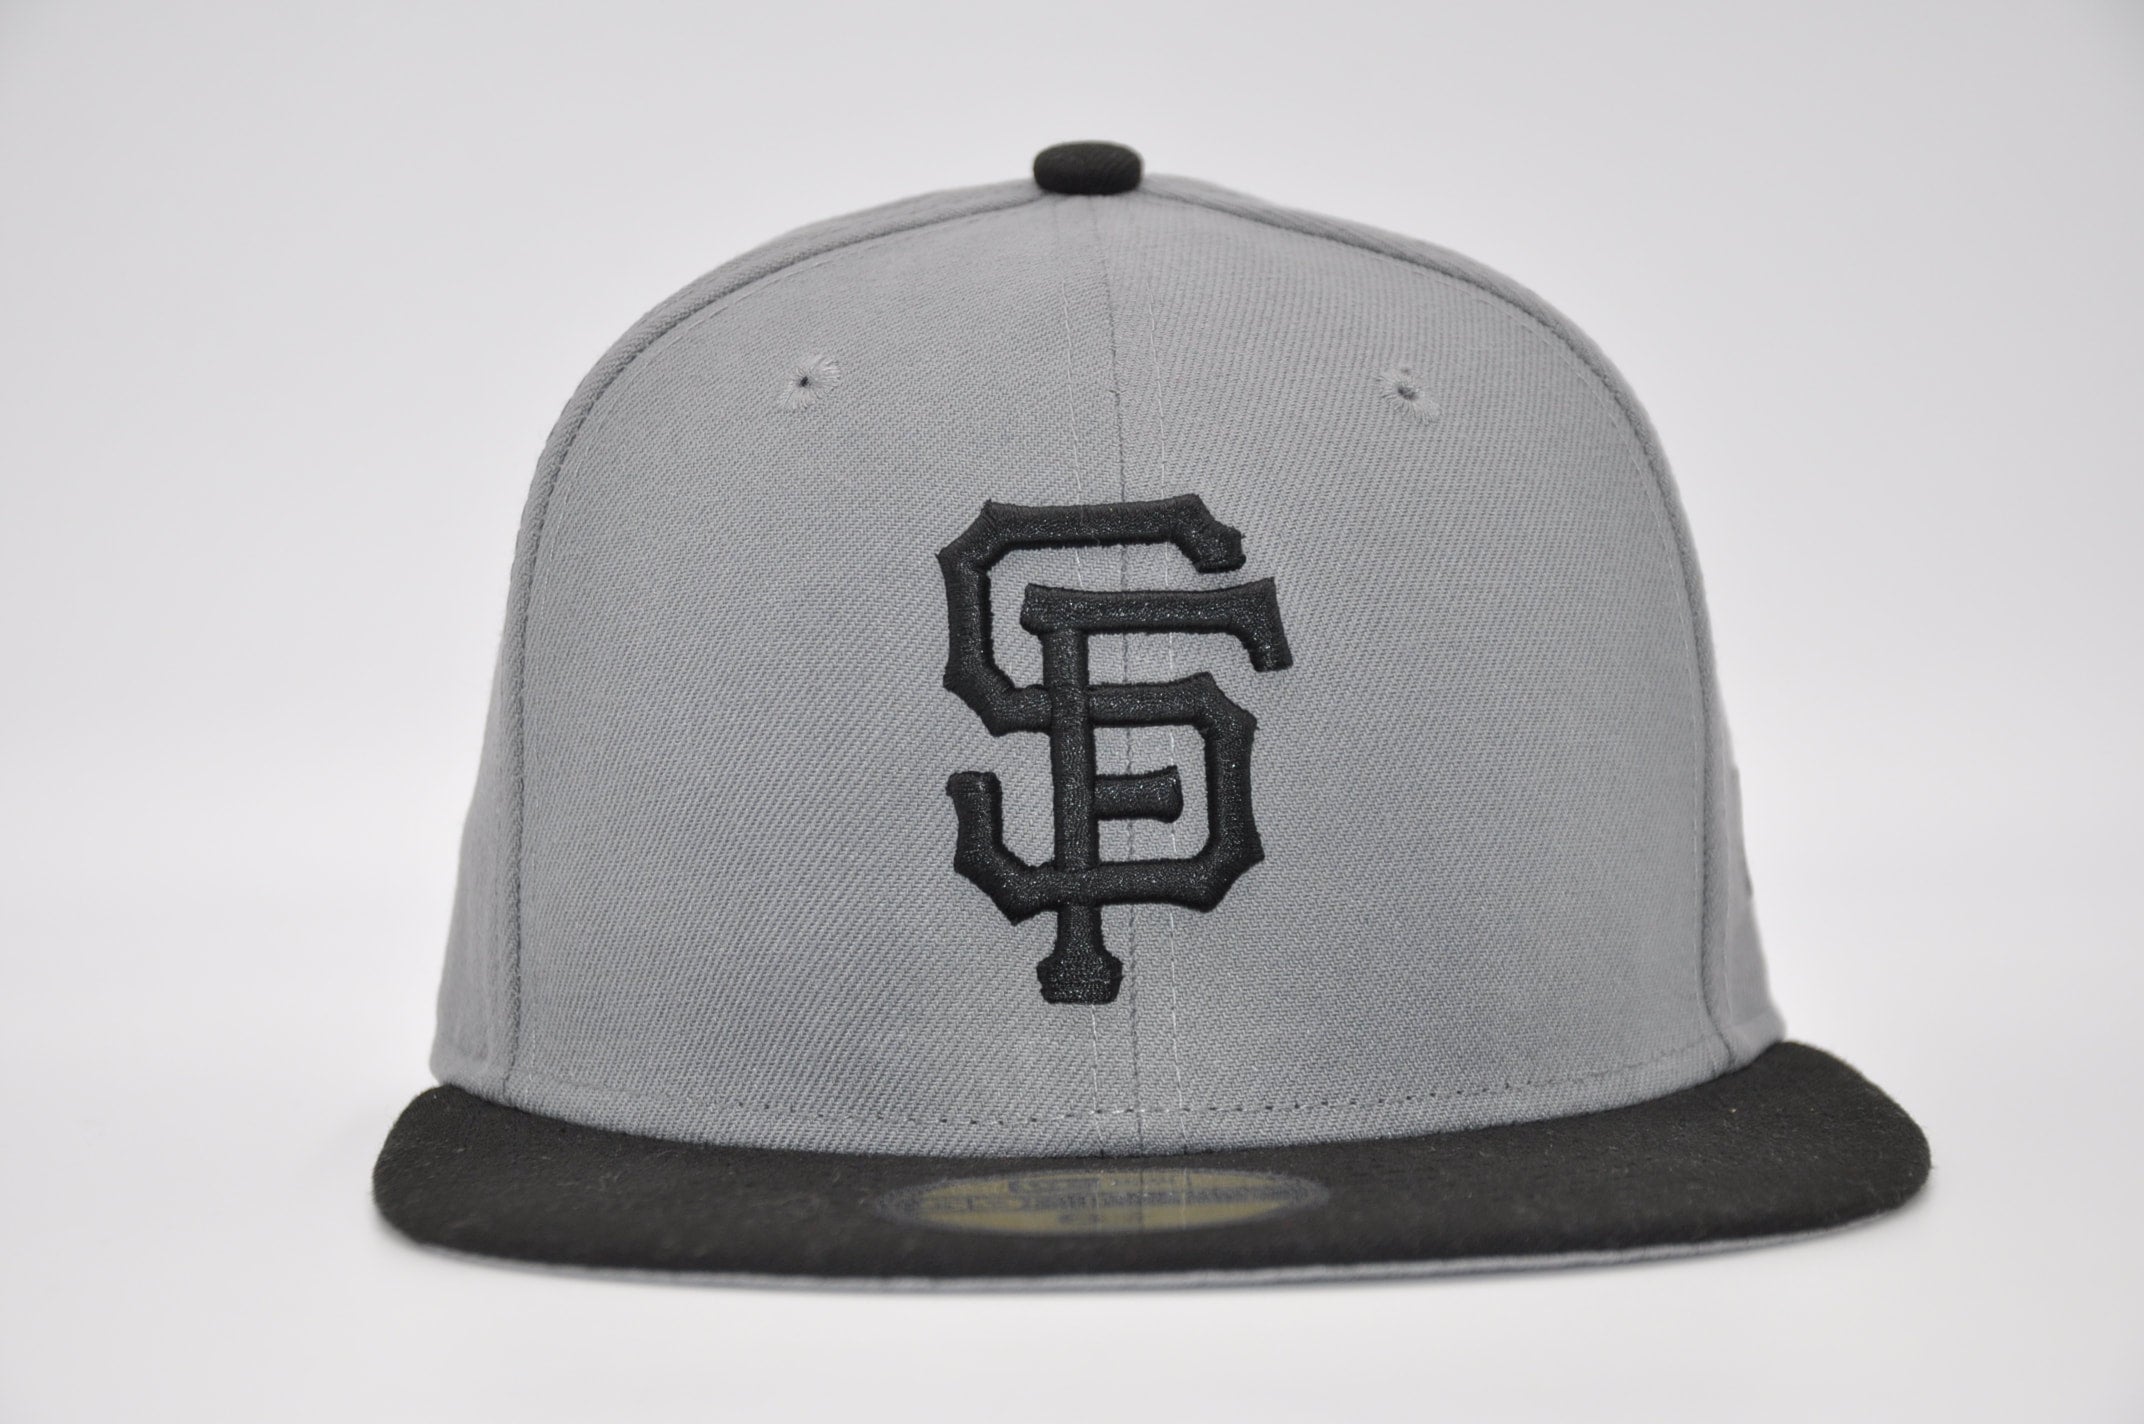 New Era San Francisco Giants 59FIFTY Fitted Hat, Black, Size: 7 3/4